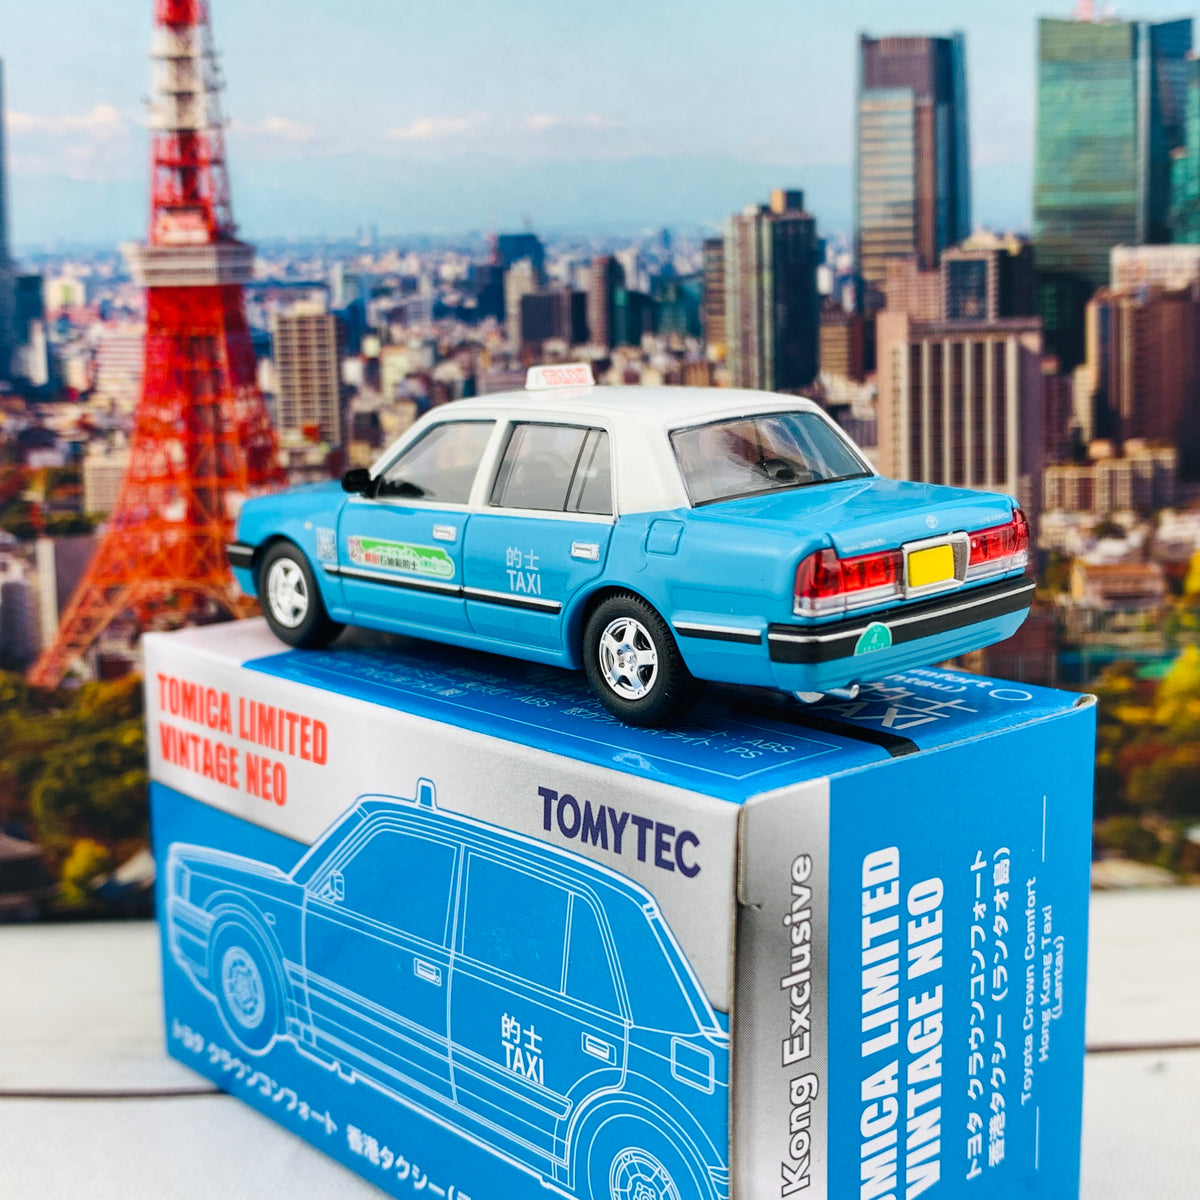 1:64 Tomytec Tomica Limited Vintage Neo Toyota Crown Comfort Hong Kong Taxi TLV 